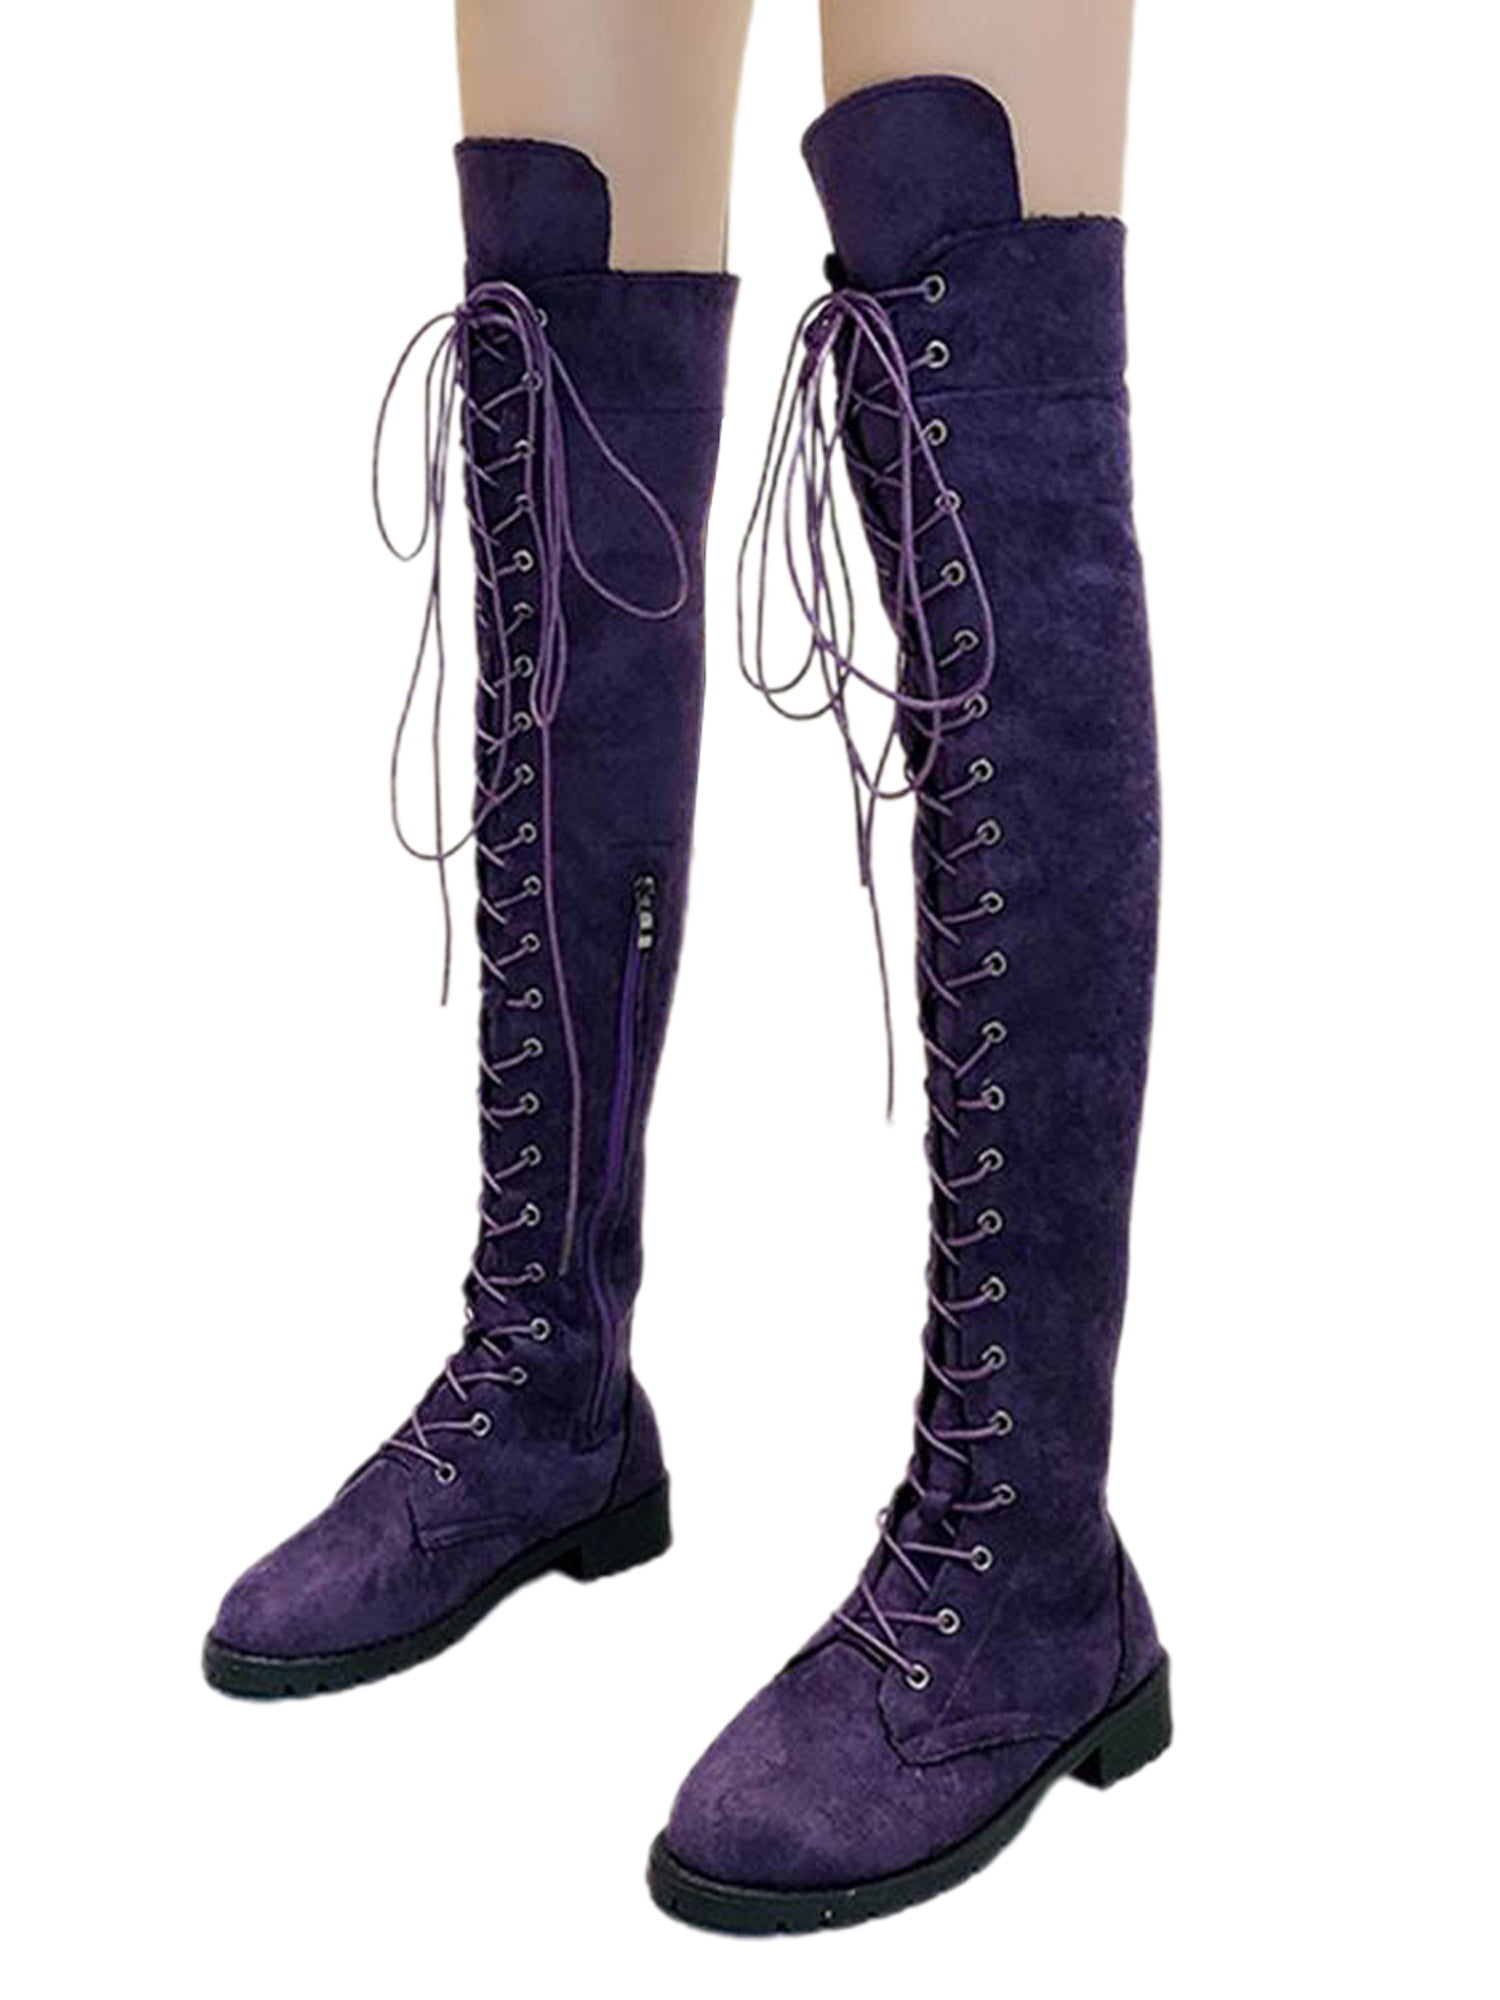 Womens Low Heel Knee High Riding Boots Lace Up Side Zipper Round Toe Shoes HOT 